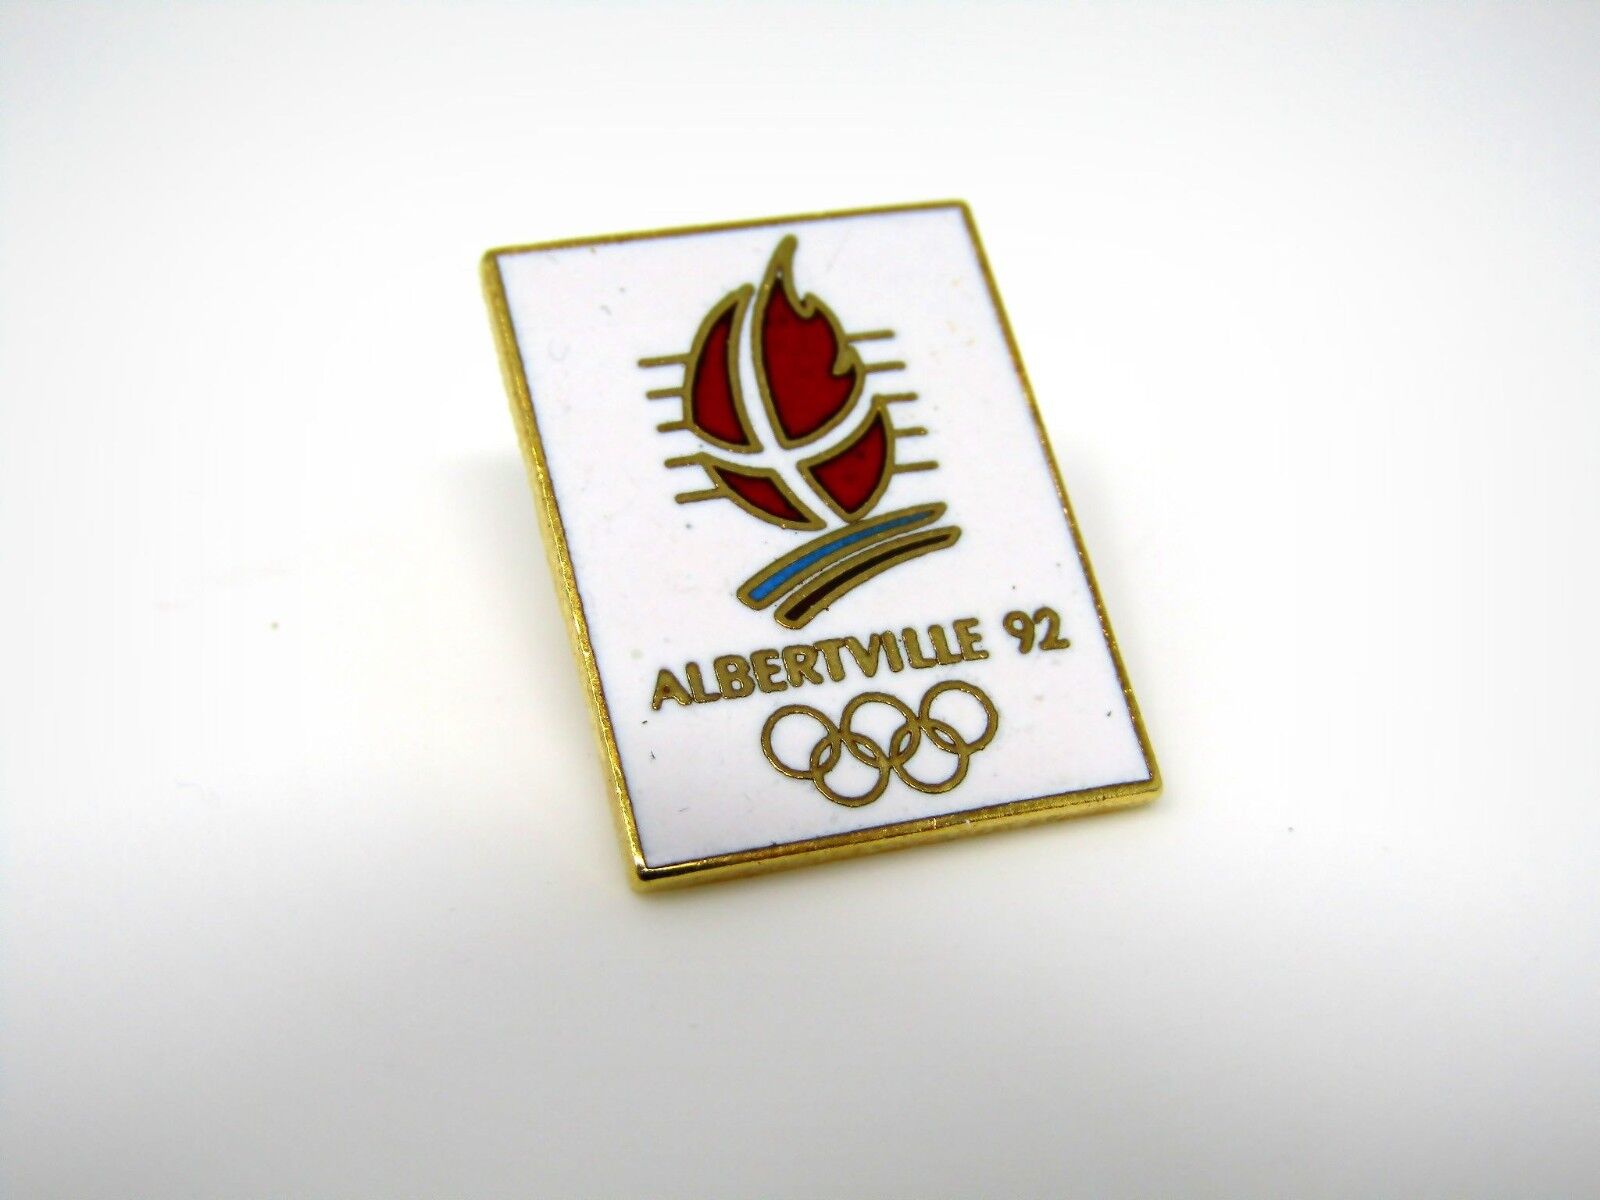 Vintage Collectible Pin: 1992 Albertville Olympics